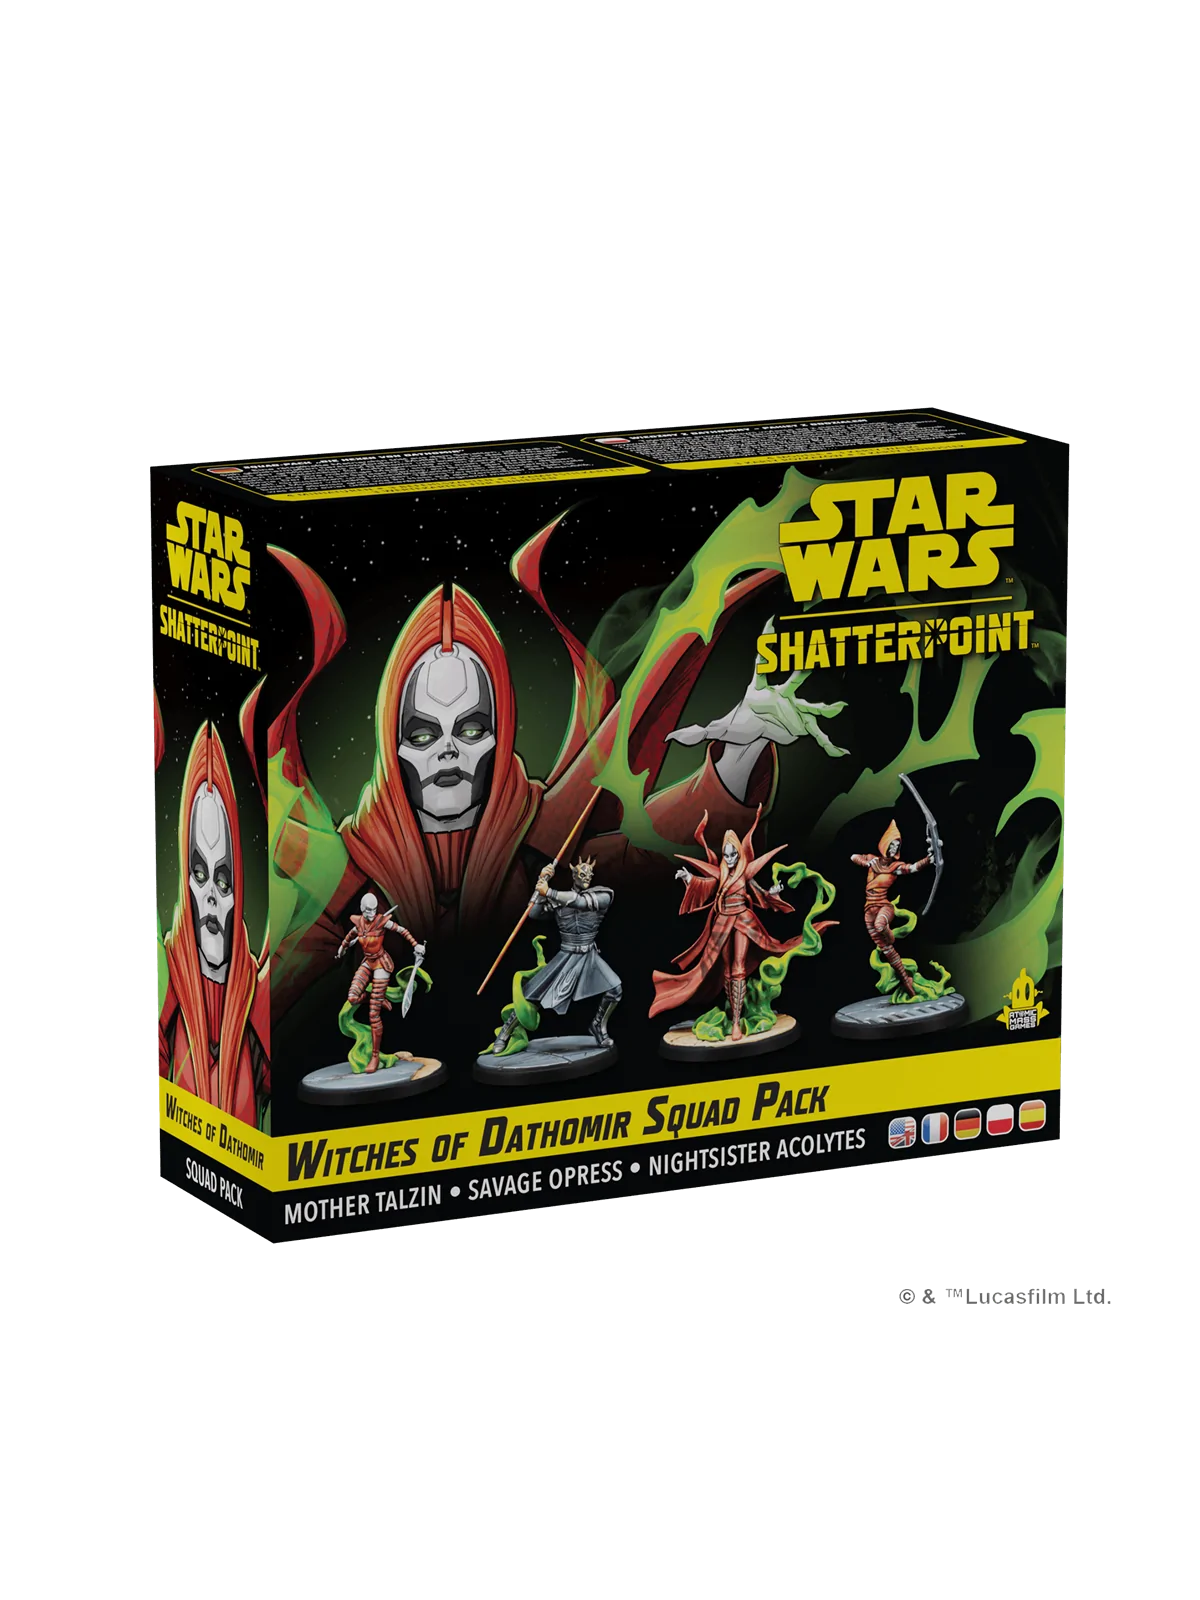 Comprar Star Wars Shatterpoint: Witches of Dathomir Squad Pack barato 